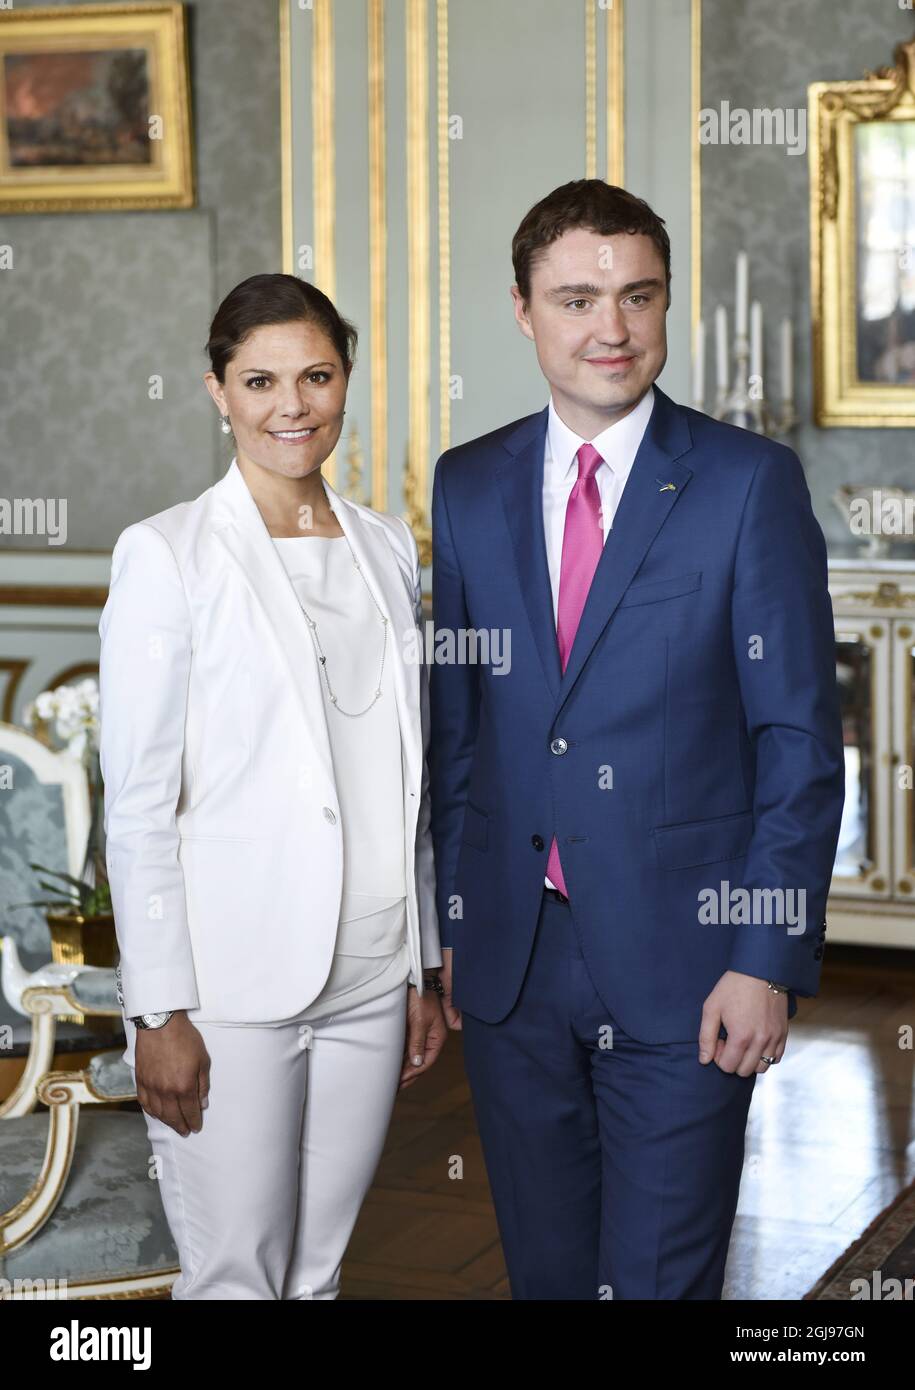 STOCKHOLM 2015-05-27 Estonian PM Taavi RÃµivas (R) and Swedish Crown Princess Victoria at during a reception at the Royal Palace in Stockholm, Sweden, May 27, 2015. RÃµivas visited Sweden for bilateral talks Wednesday. Photo Bertil Ericson / TT / Code 10000 ** SWEDEN OUT ** Stock Photo